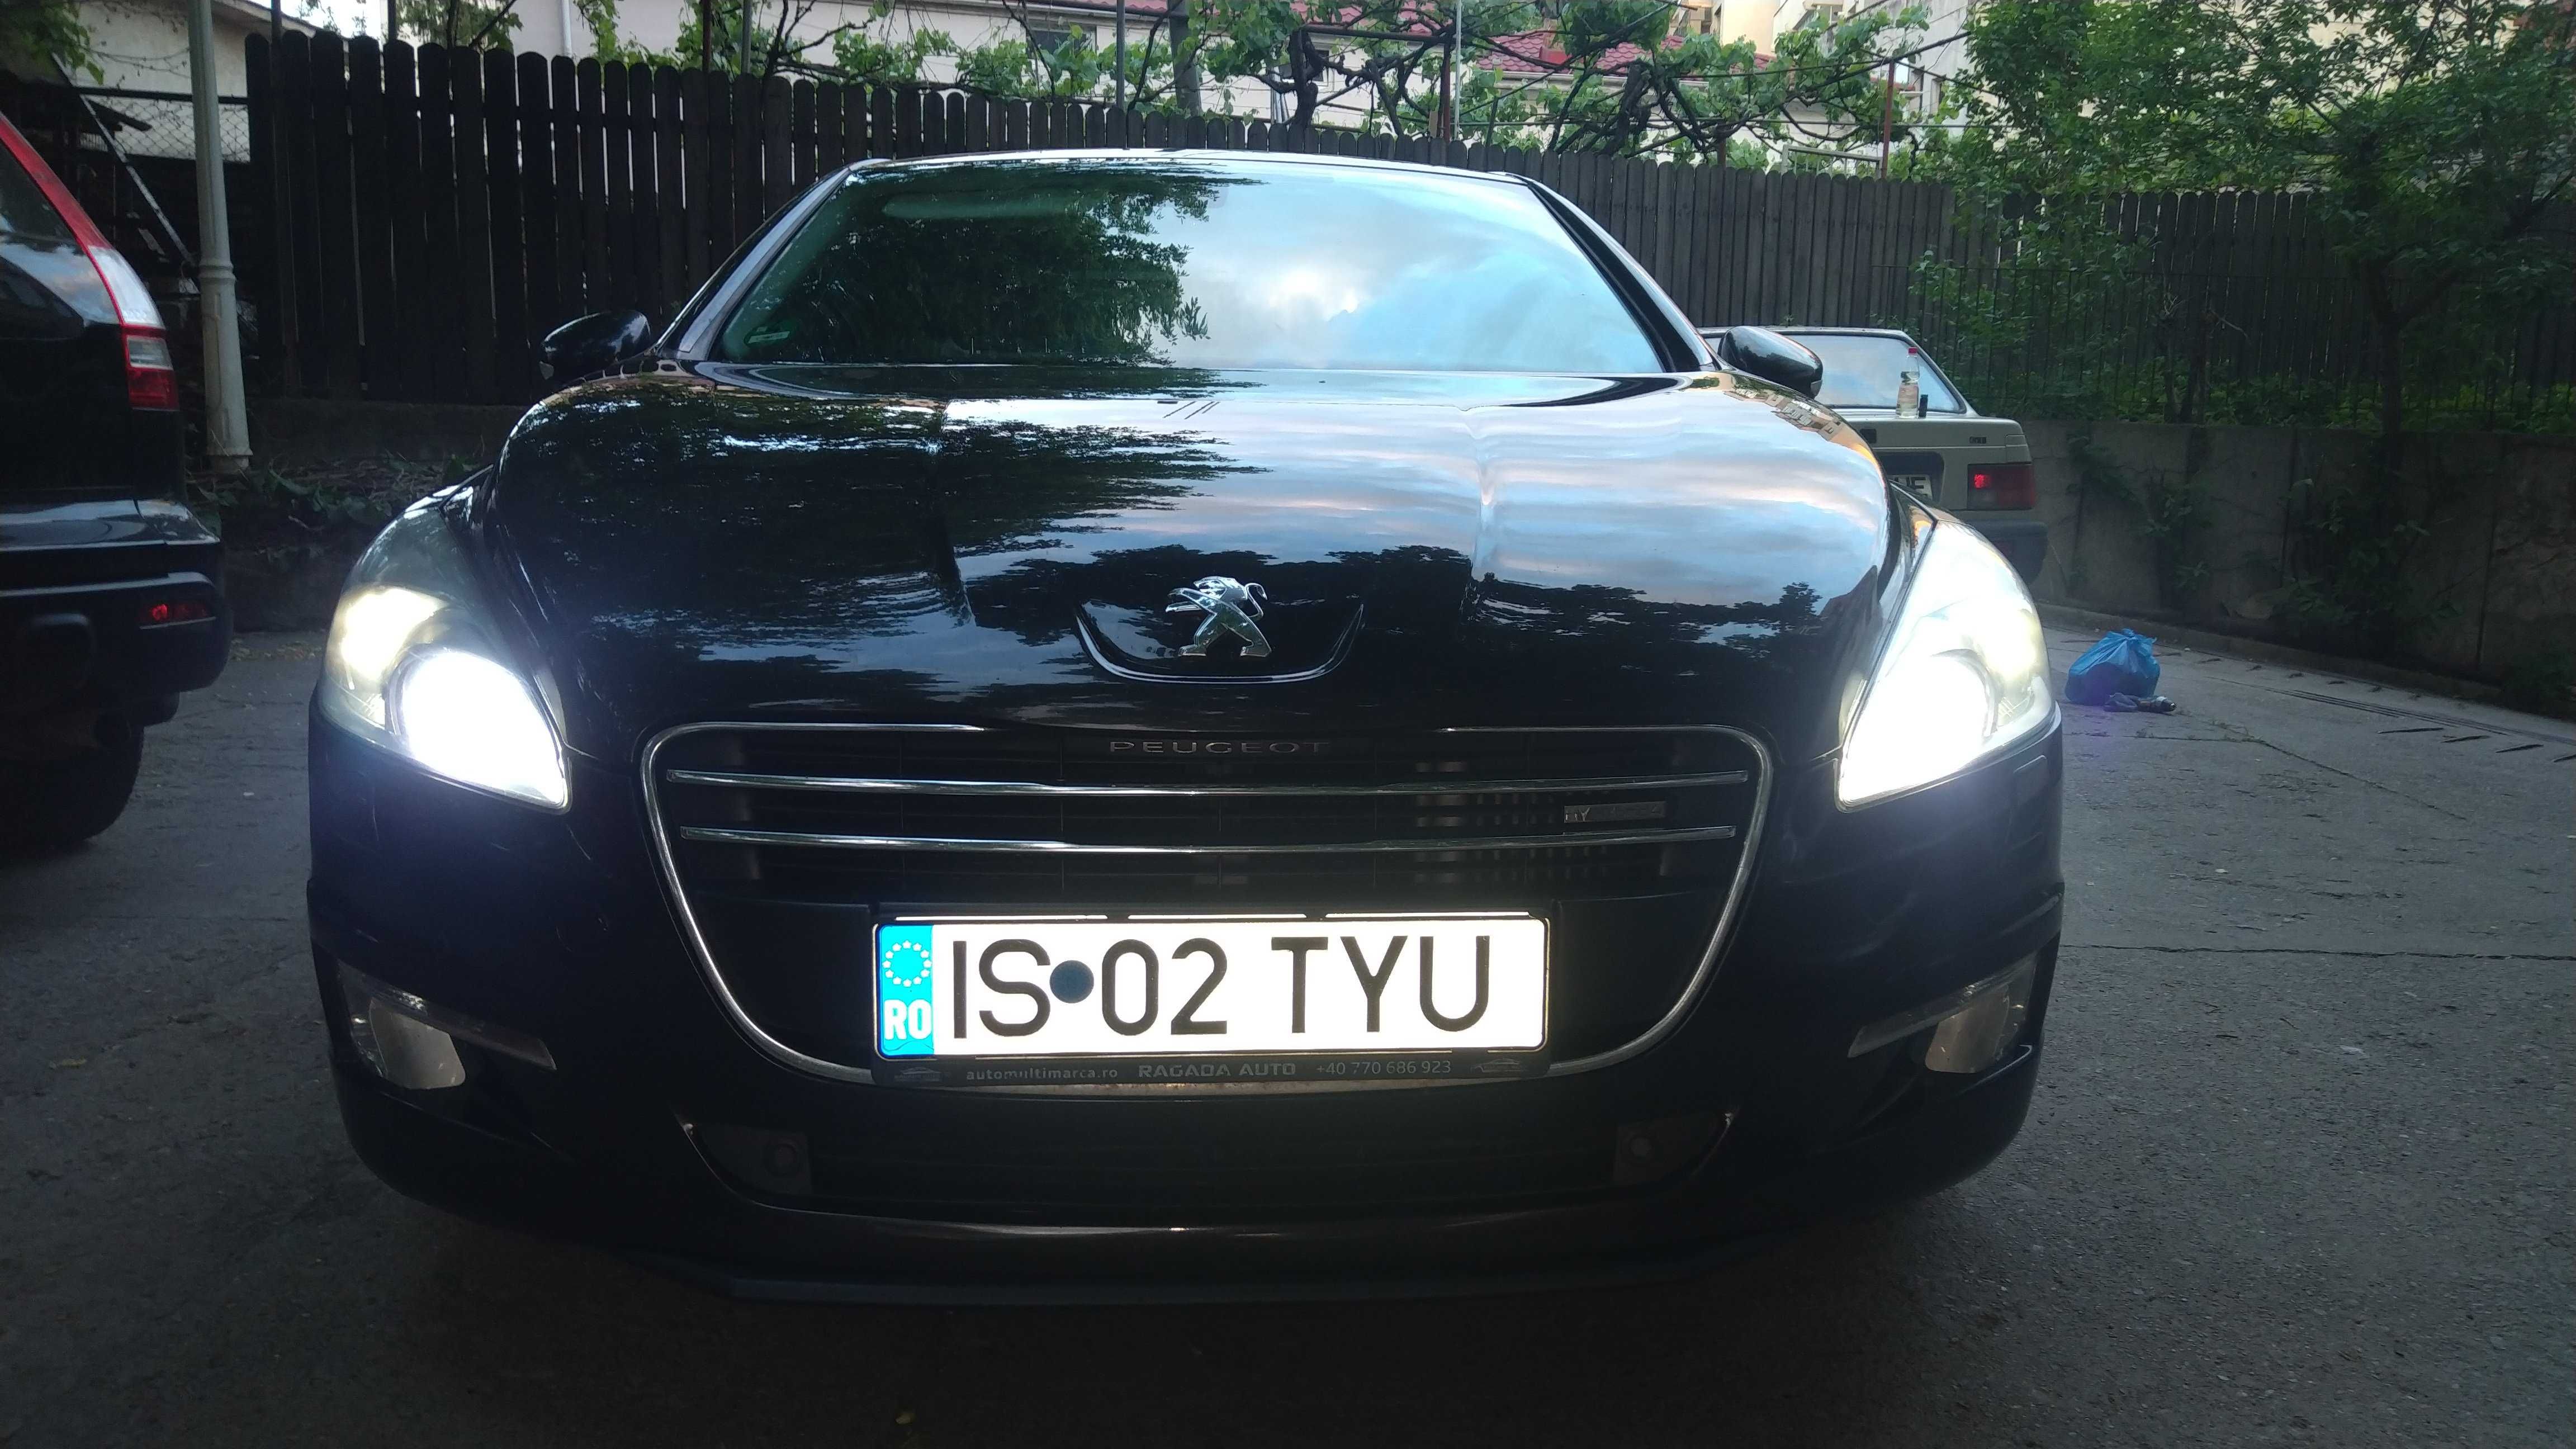 Peugeot 508 Hybrid4 Octombrie 2013